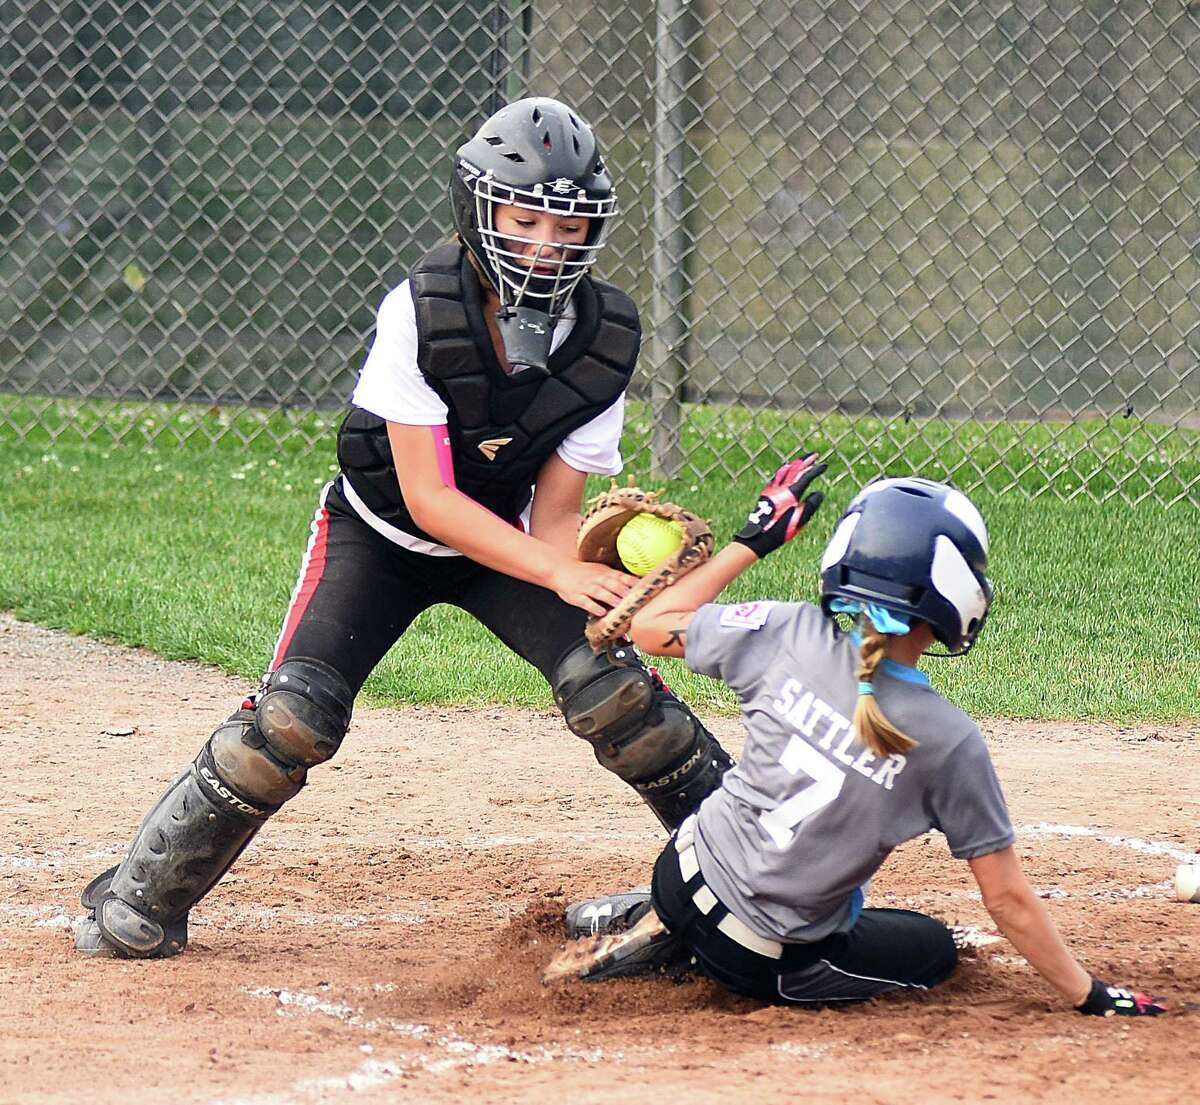 Monroe catcher Kathryn Gallant, left, puts down a tag on Rowayton base runner Lilly Sattler during Friday's opening game of the Section 1 Little League 12-year-old softball tournament at Unity Park in Trumbull. Sattler was called out on the play and Monroe defeated Rowayton 13-1.